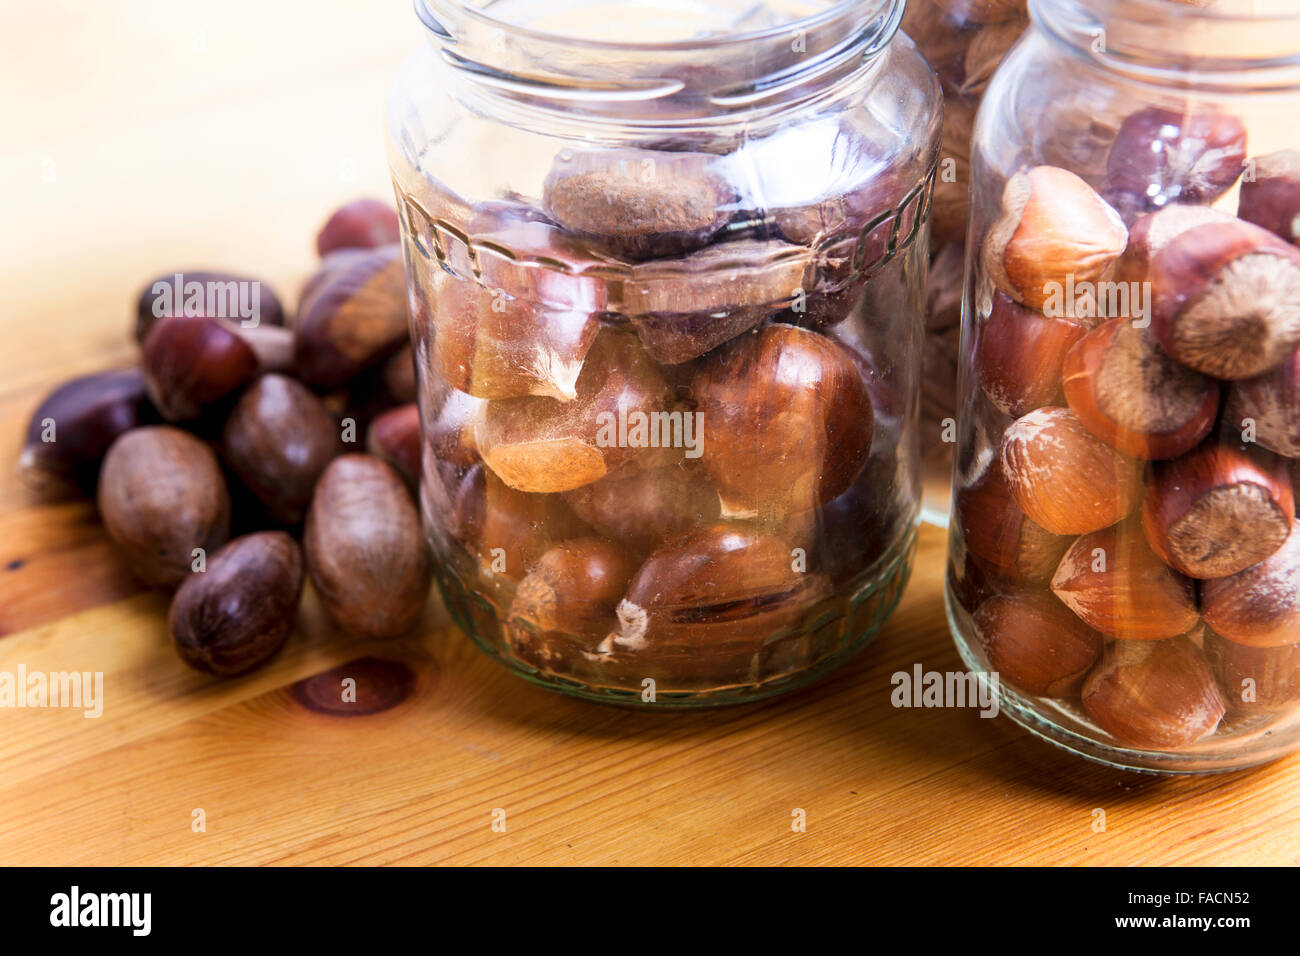 Nuts on glass jars over wooden surface. Isolated over white background Stock Photo